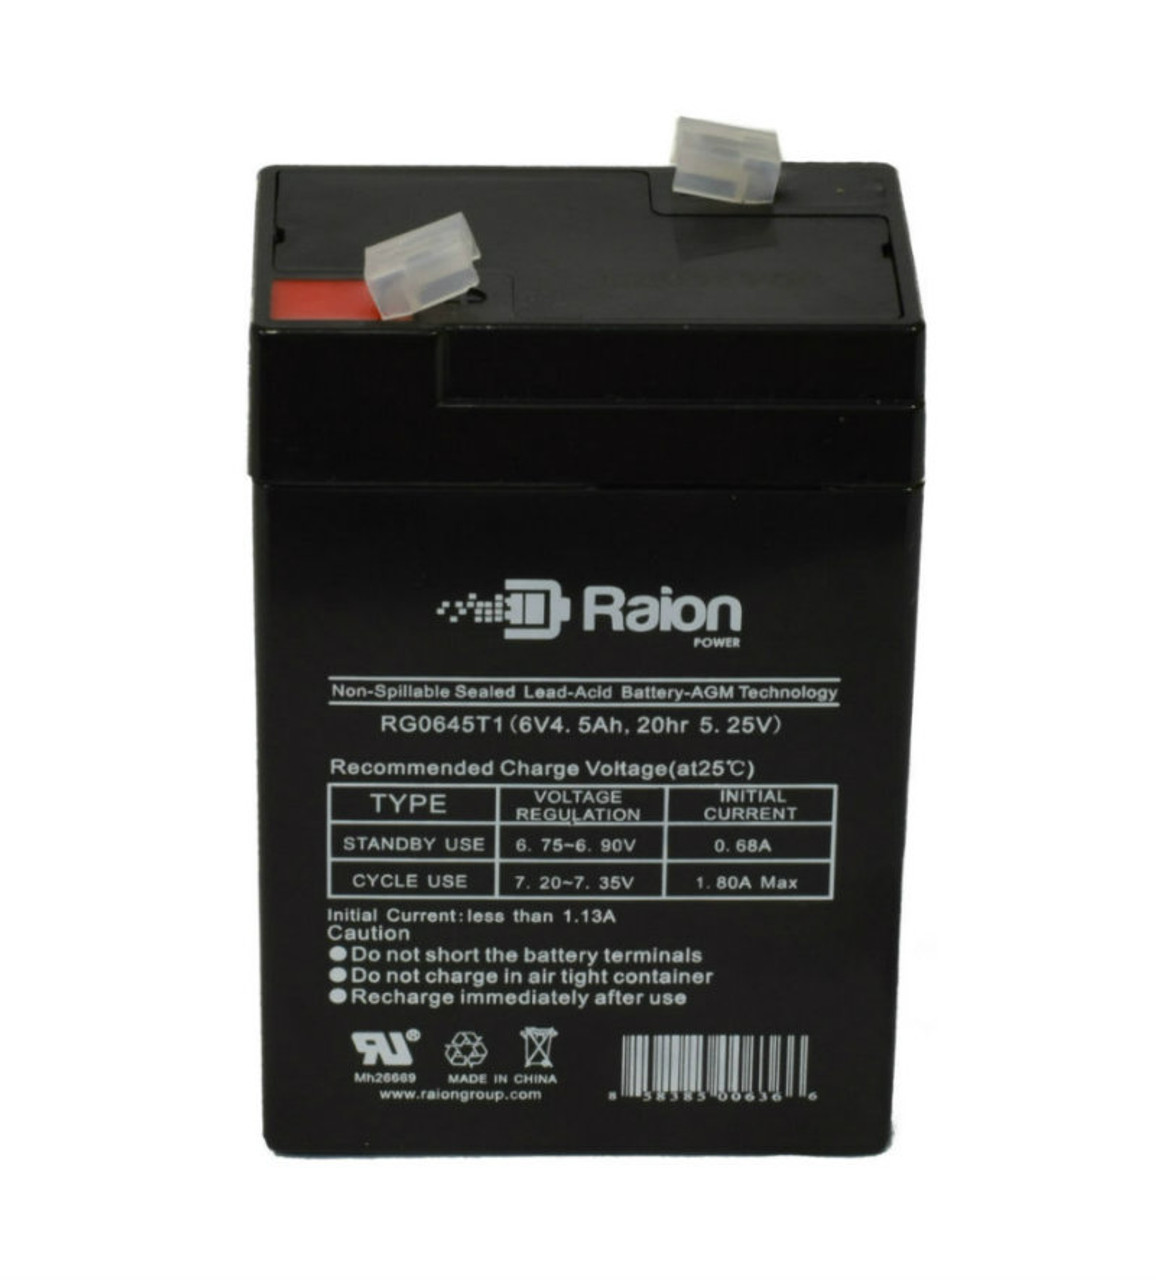 Raion Power RG0645T1 Replacement Battery Cartridge for Emergi-Lite 12E3PS